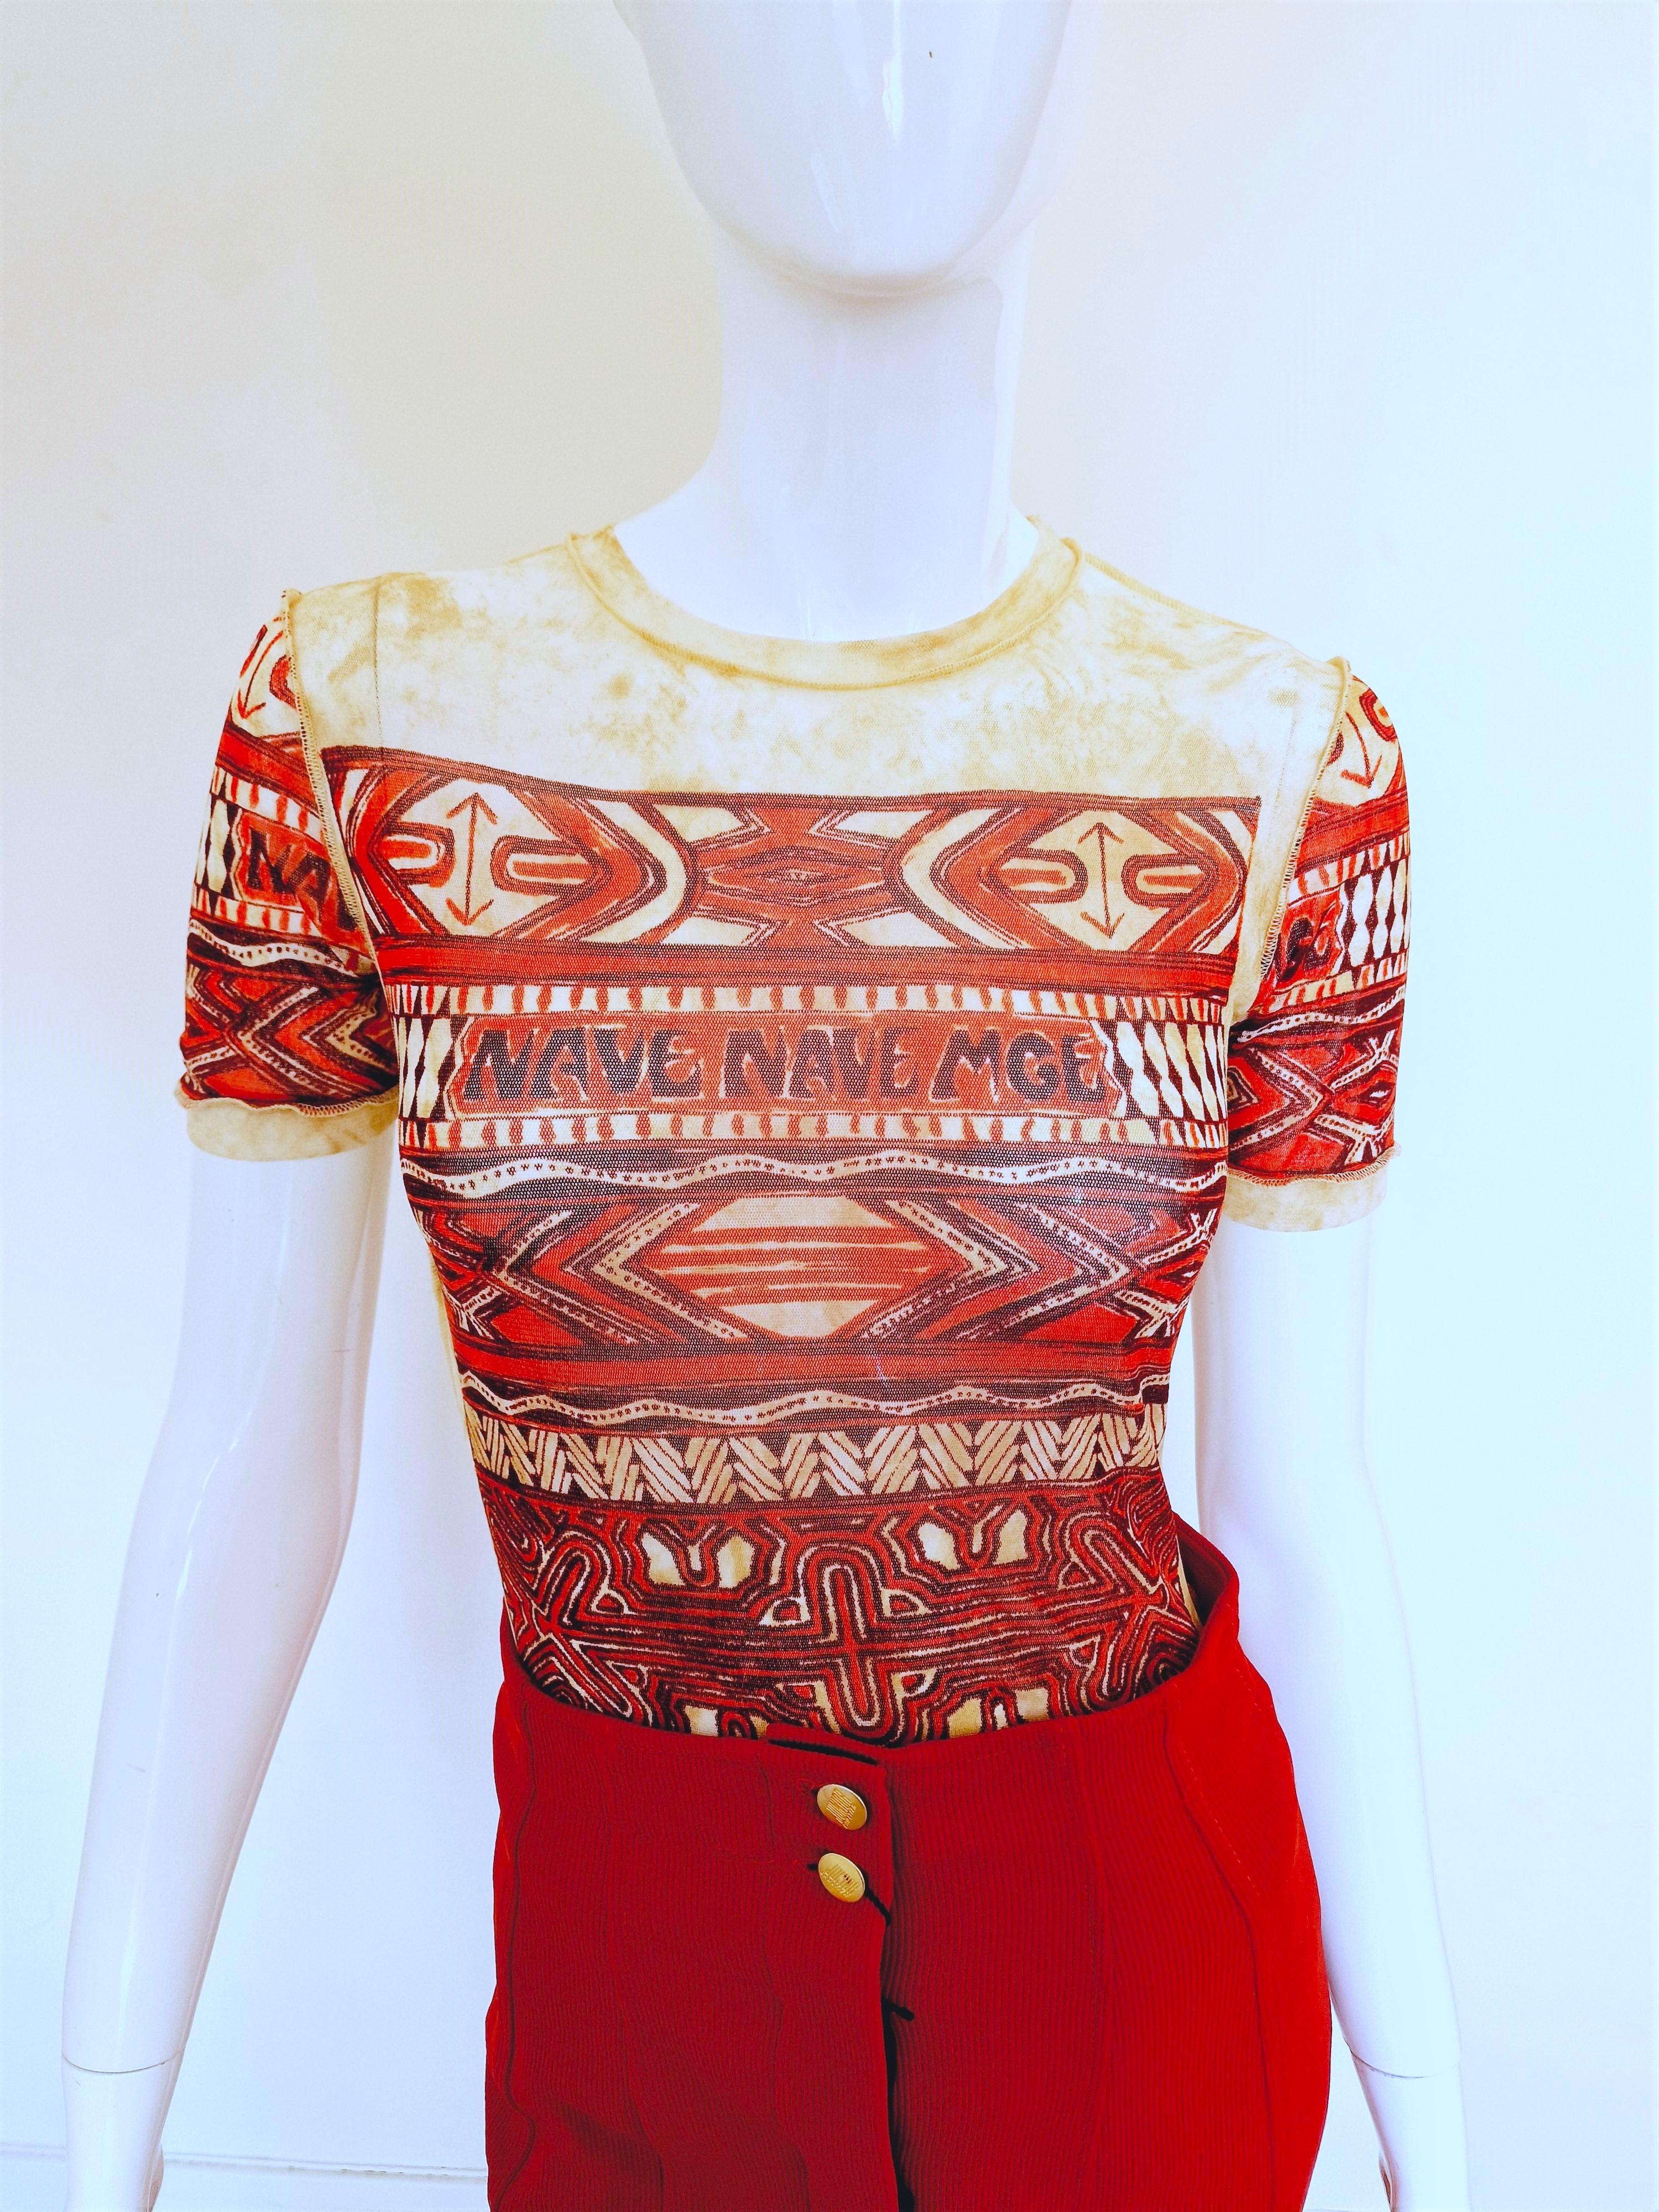 Paul Gauguin mesh top by Jean Paul Gaultier!
Gauguin was an important figure in the Symbolist movement as a painter, sculptor, printmaker, ceramist, and writer. 

Pattern:
Refection for Paul Gauguin`s work. He was 
Text on the top and the